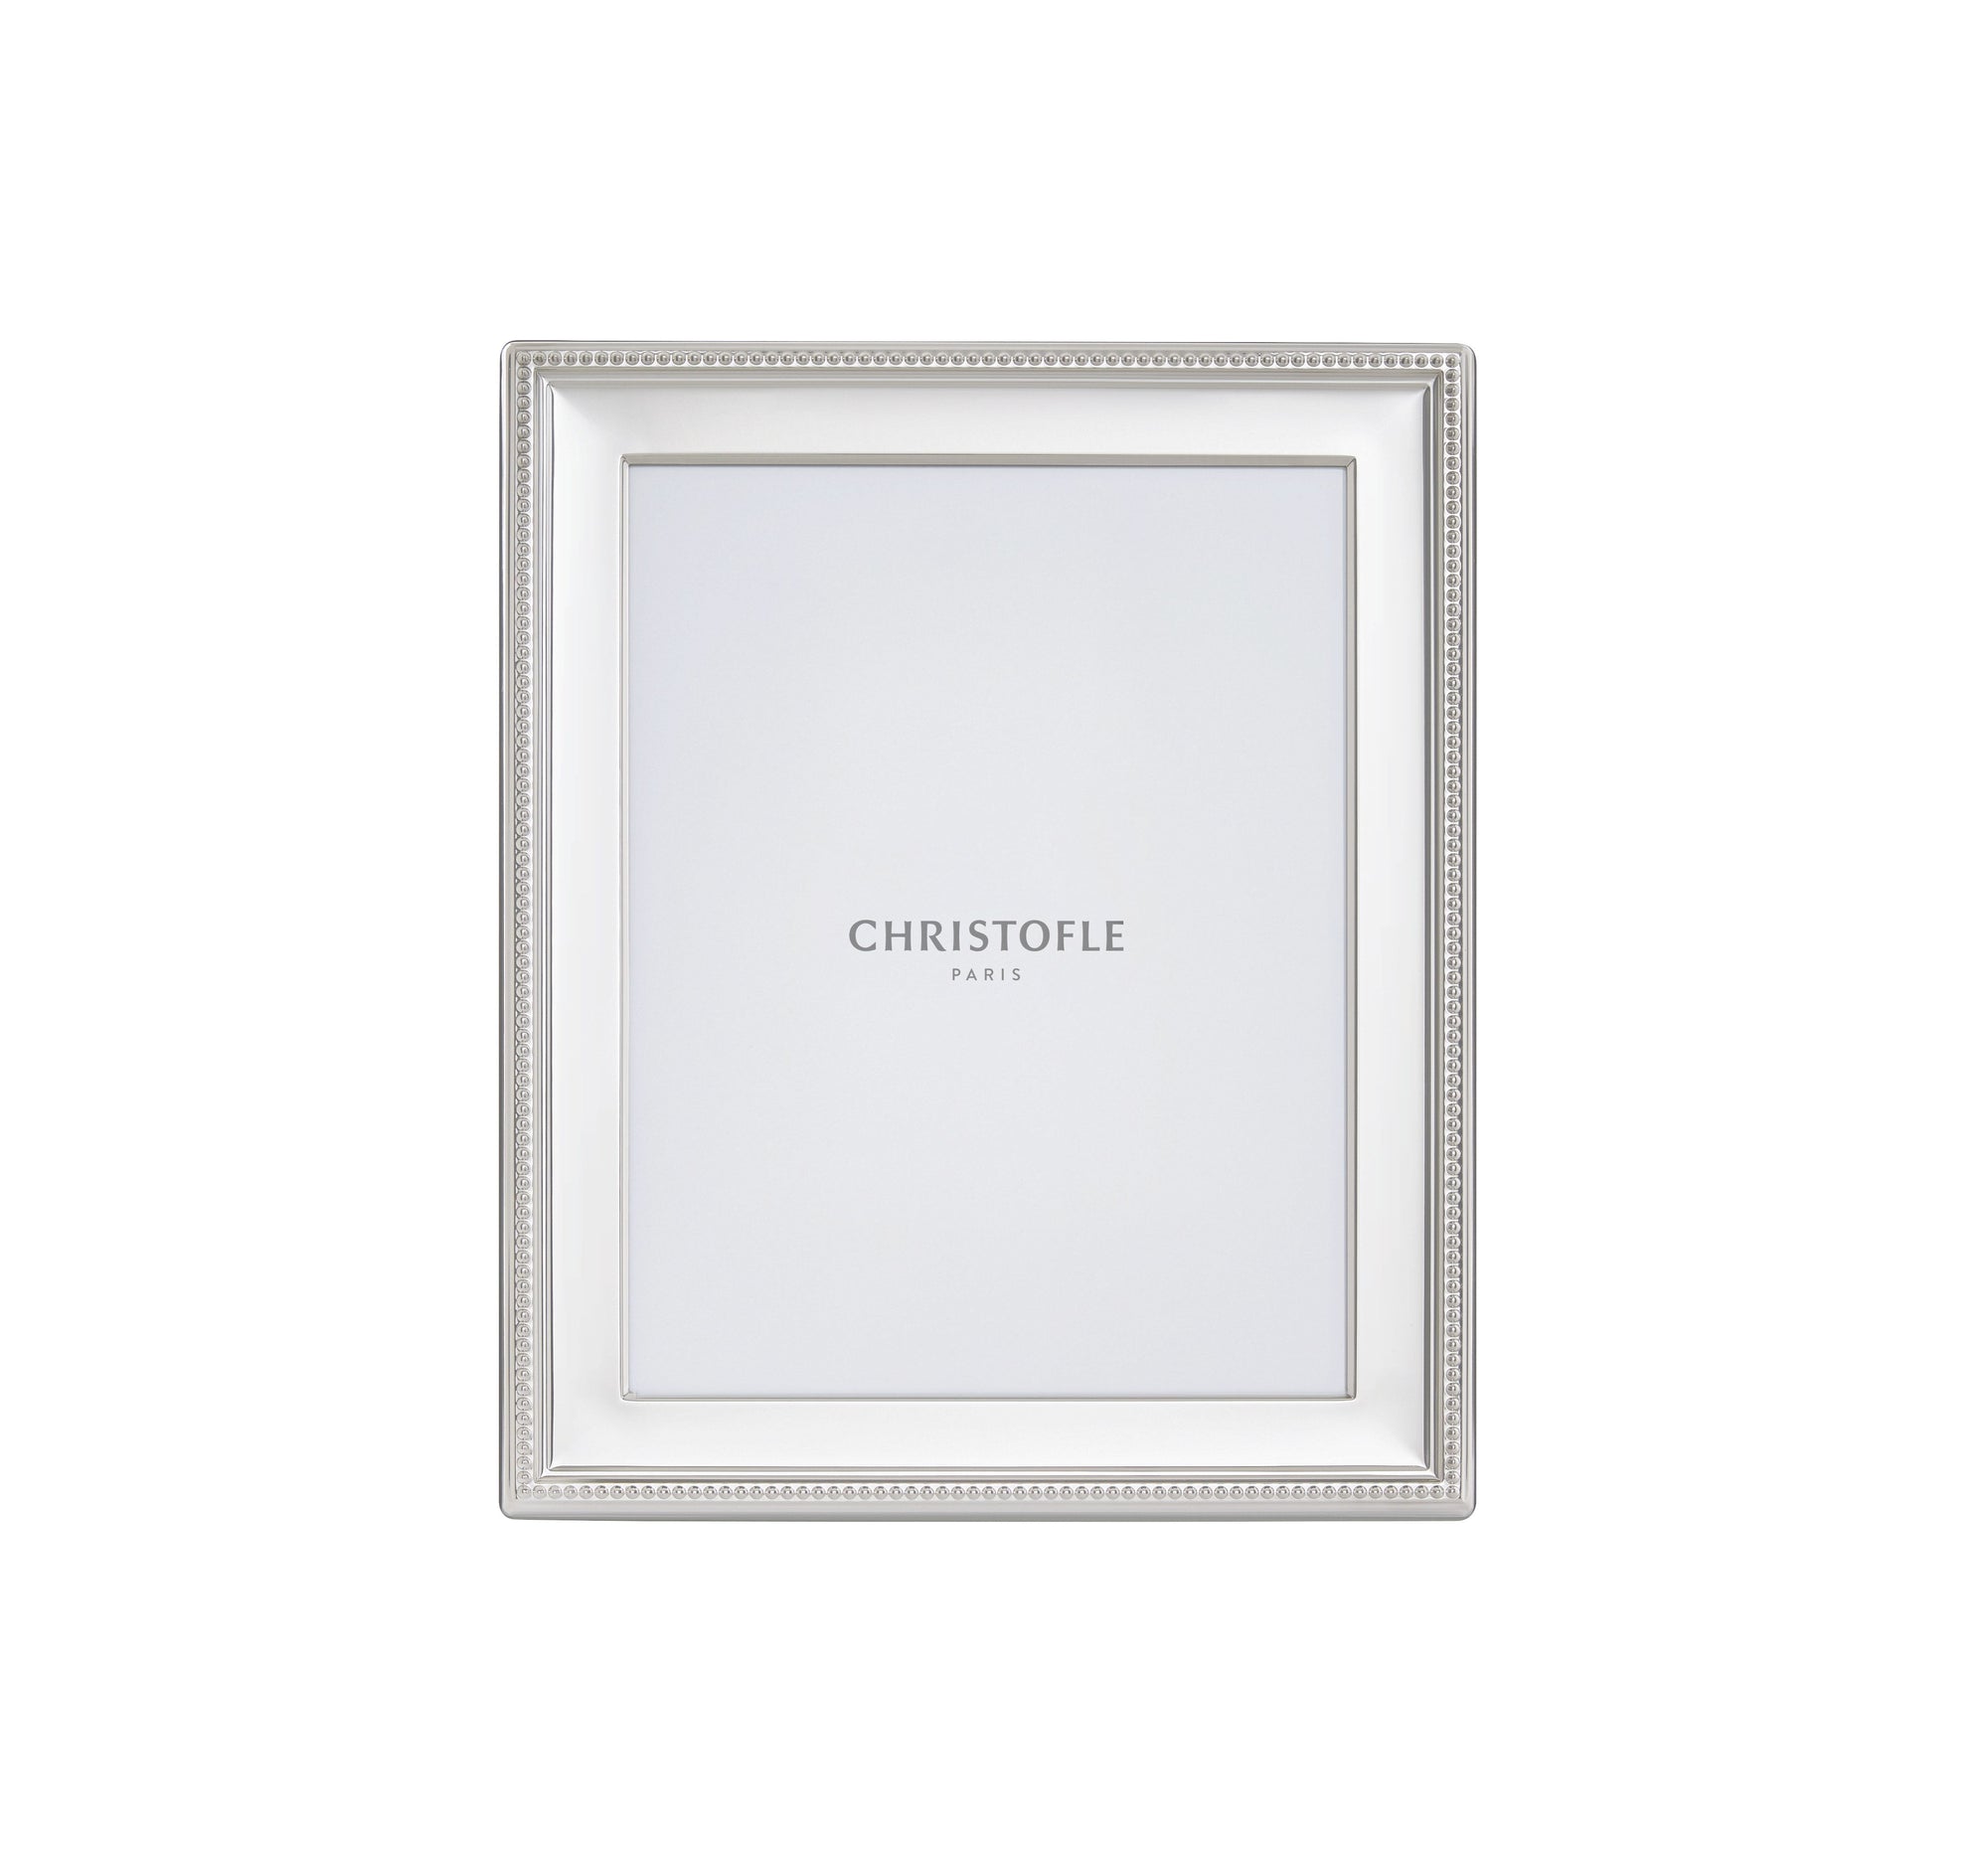 Christofle Perles Picture Frame Silver Plated